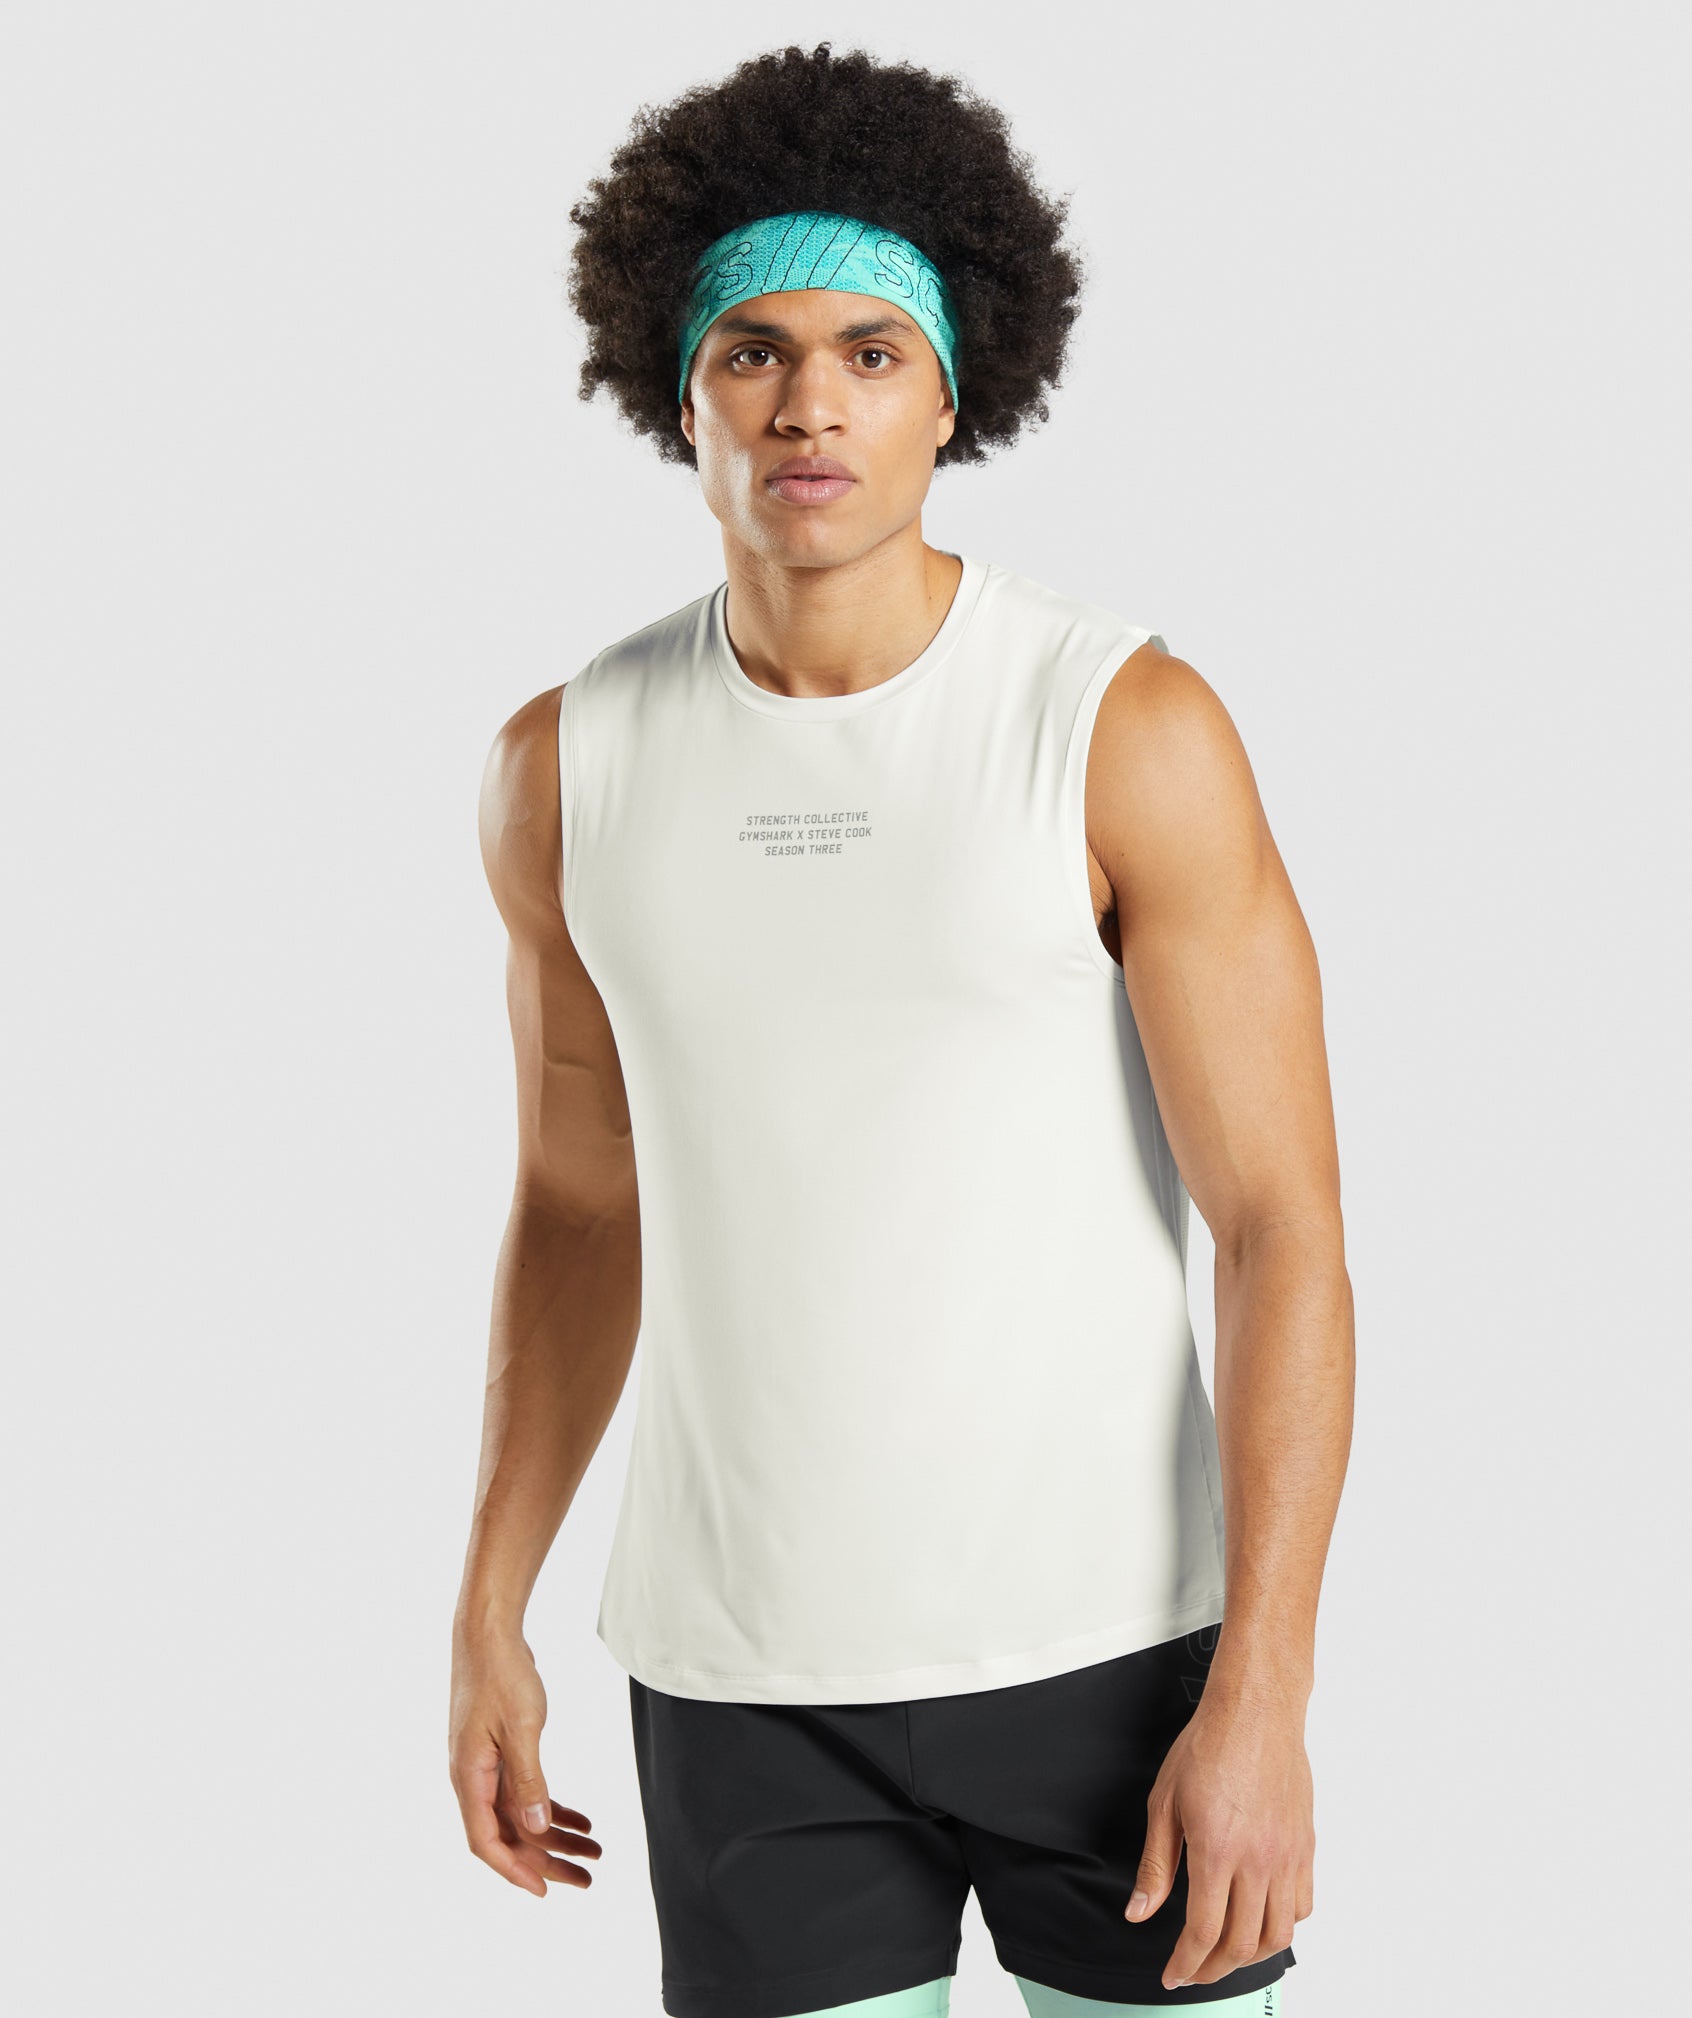 Gymshark//Steve Cook Tank in Off White - view 2